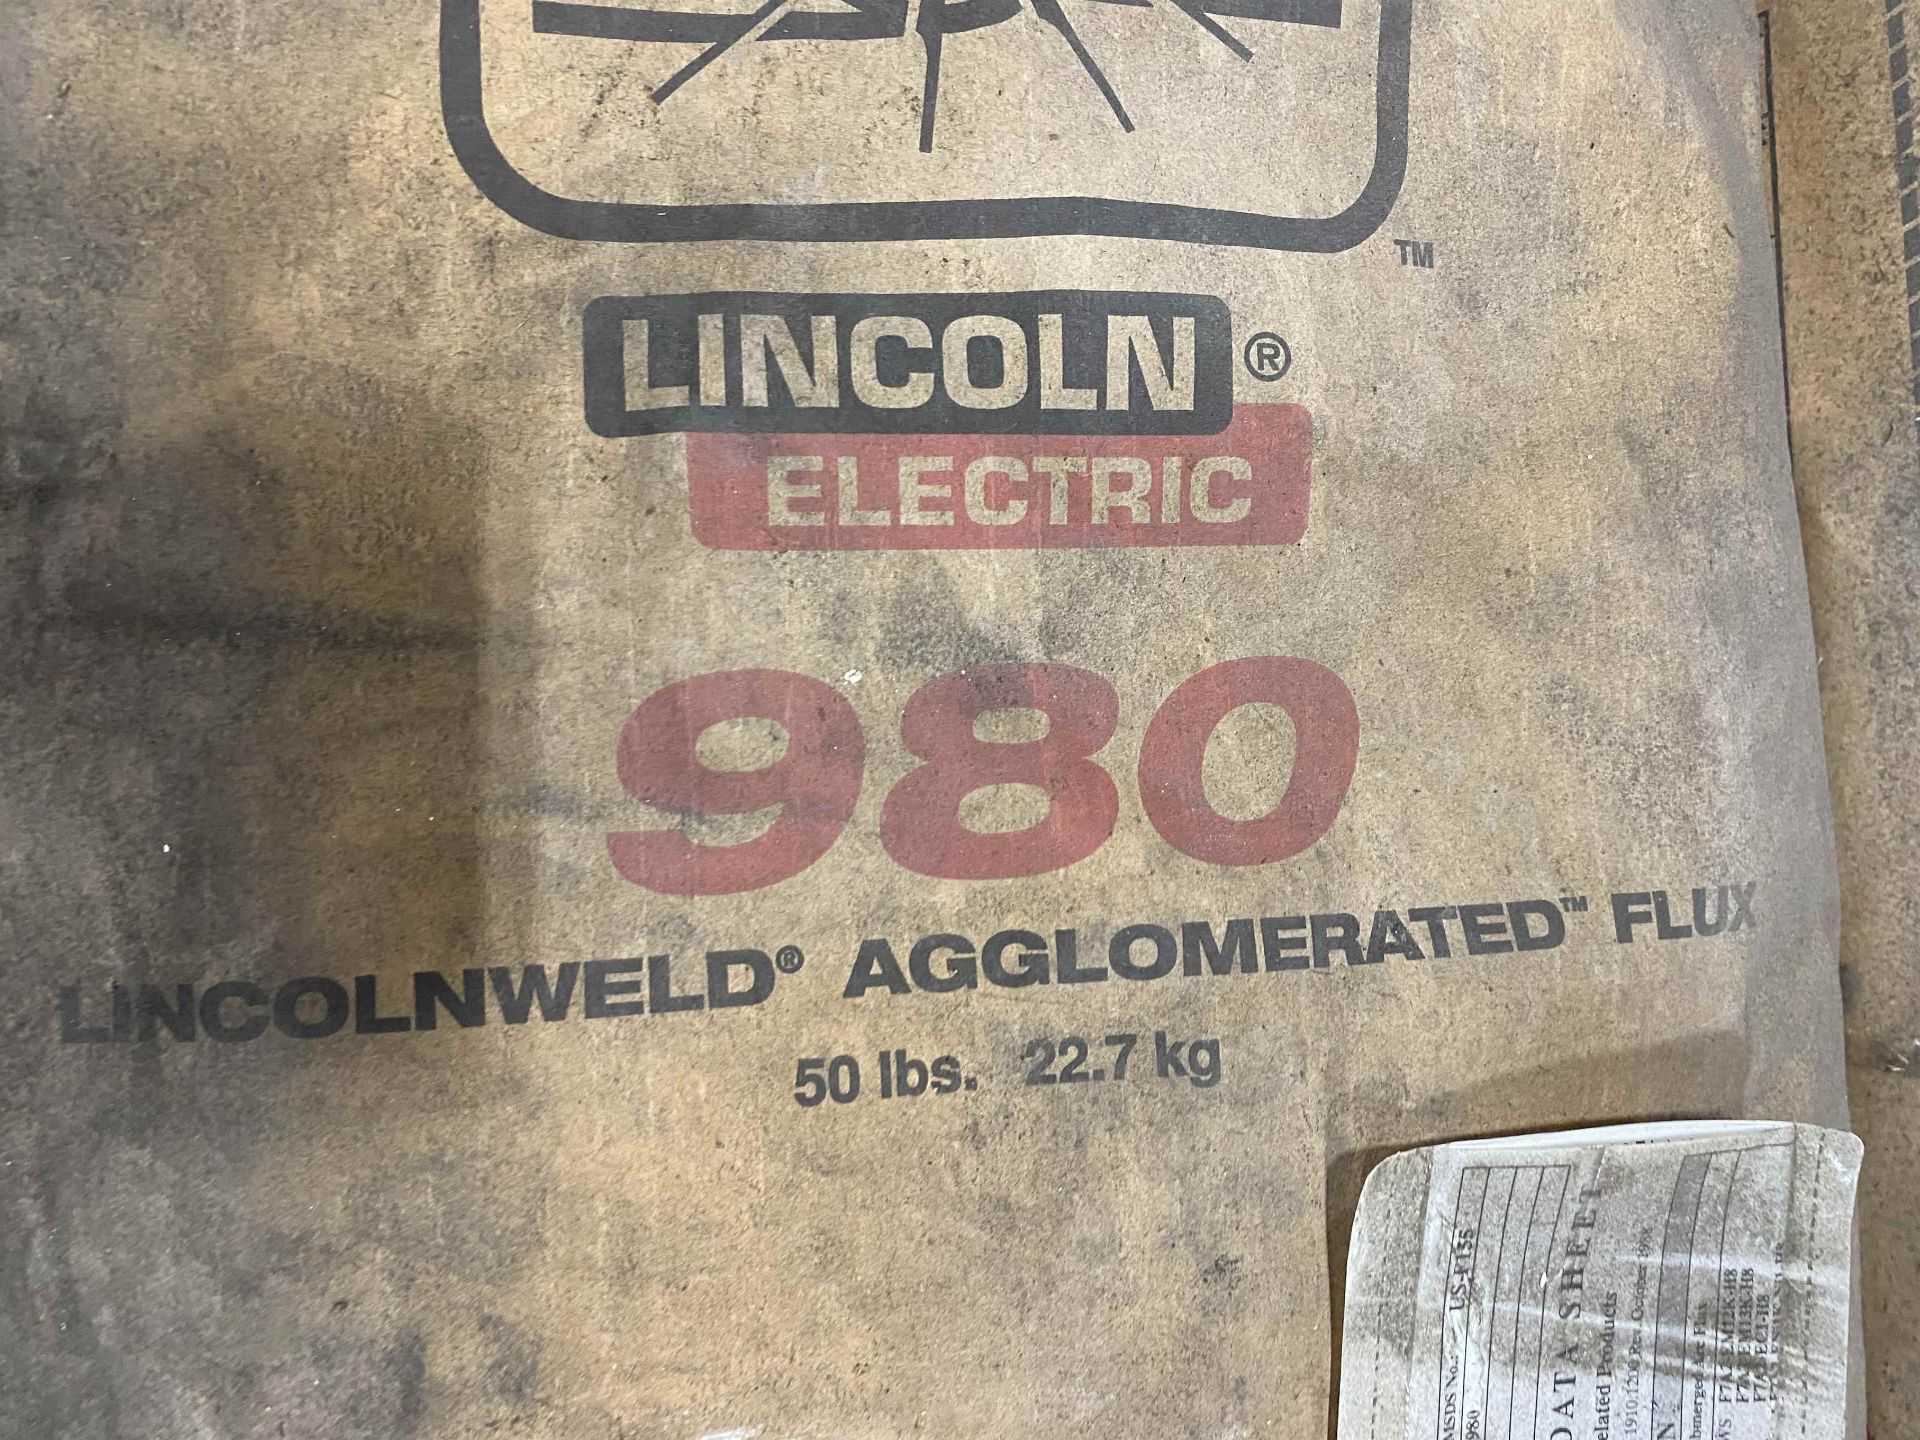 Lot of LINCOLN 980 Lincolnweld Agglomerated Flux - Bild 2 aus 2